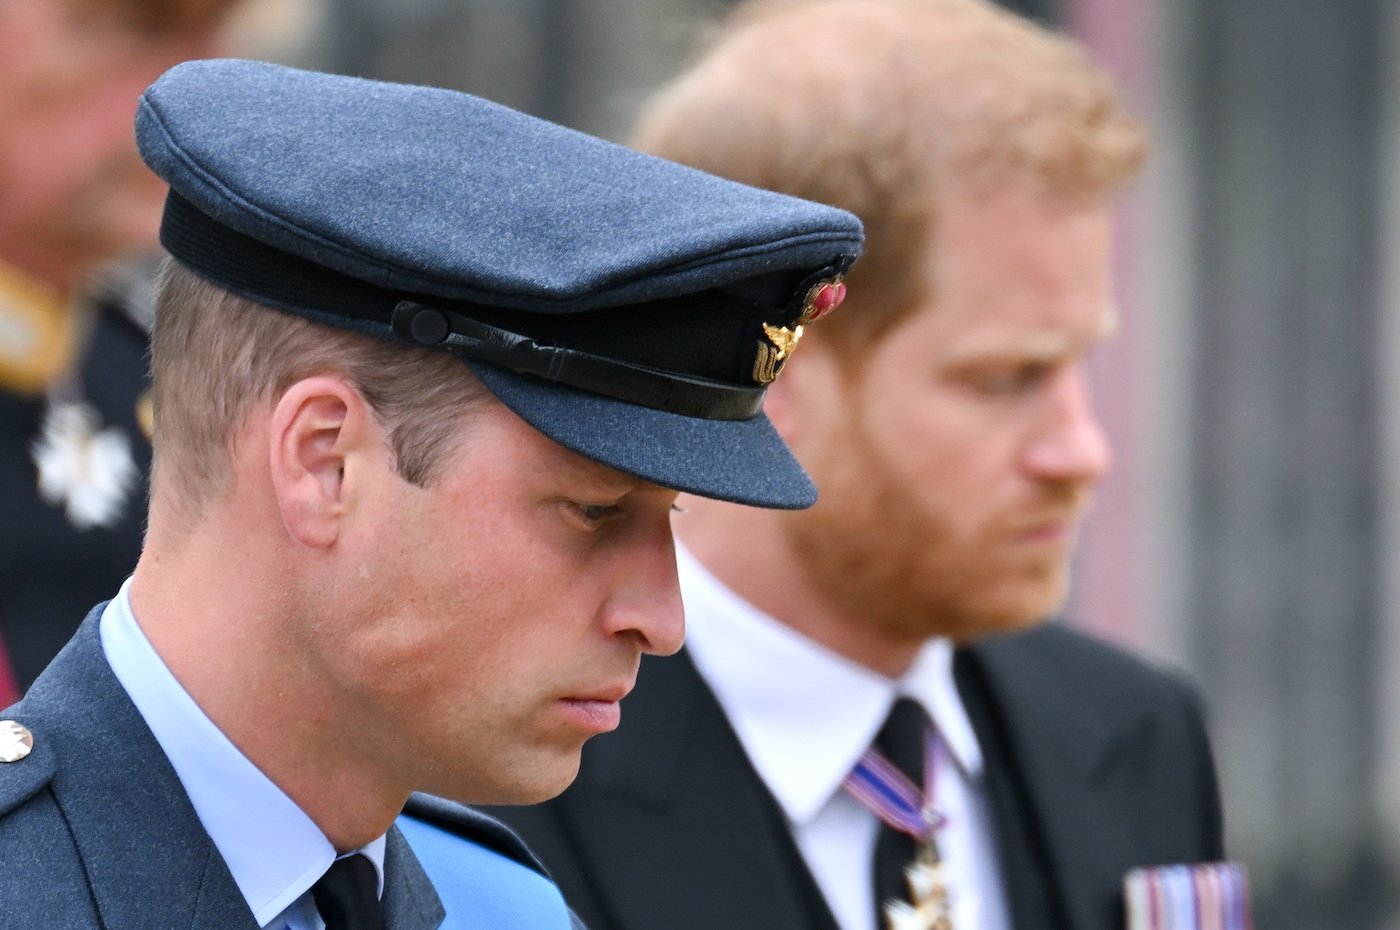 Prince William and Prince Harry, Duke of Sussex attended the Queen's funeral